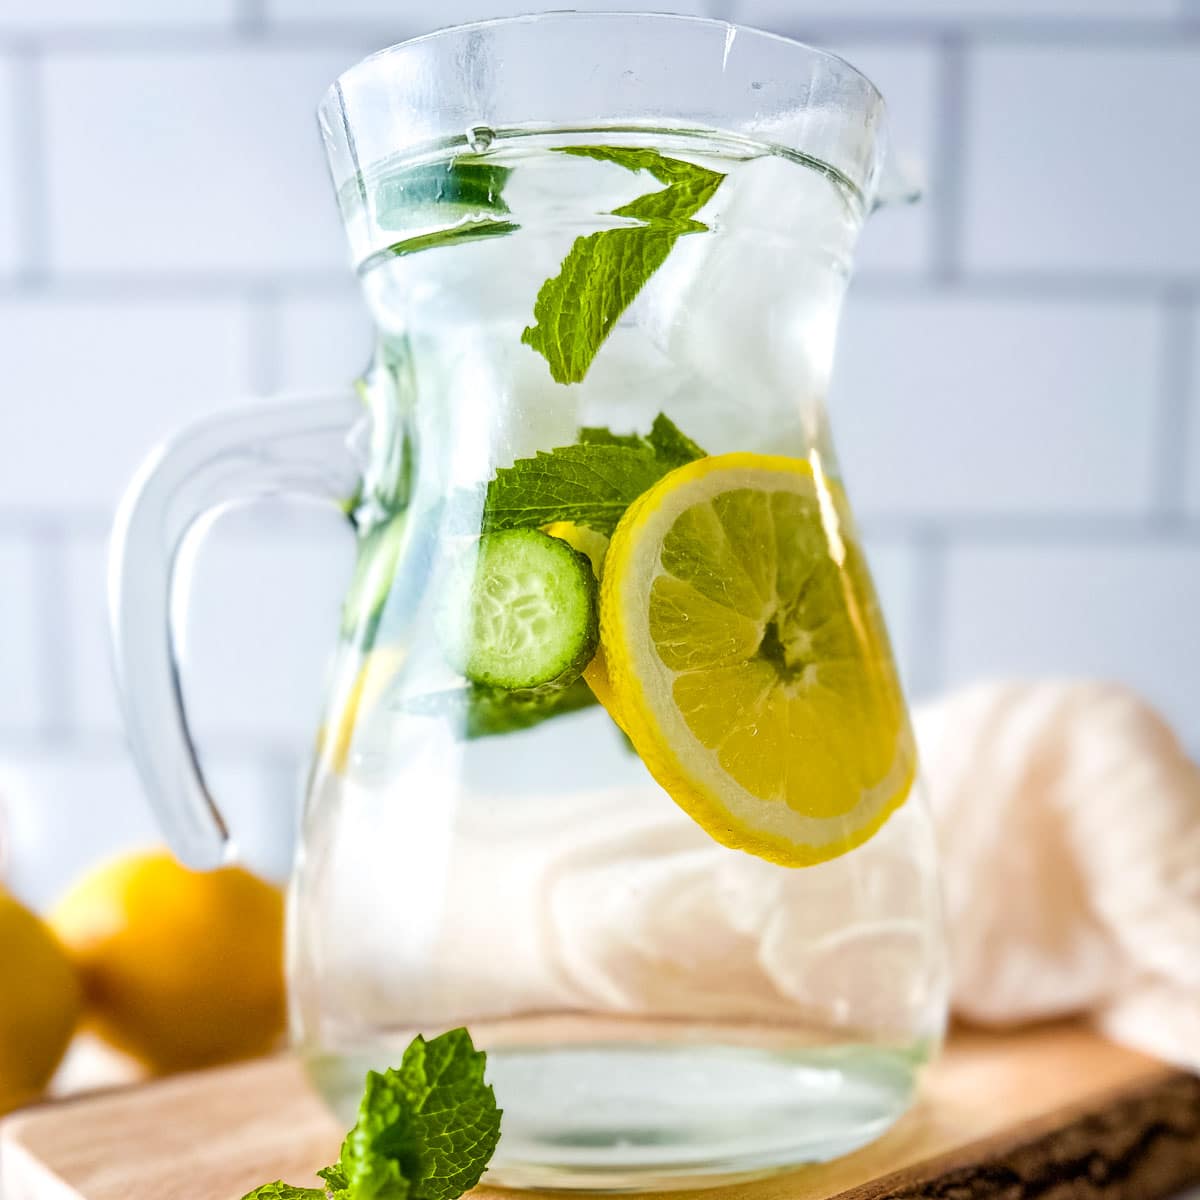 Cucumber lemon mint water in a clear pitcher on a rustic wooden cutting board.